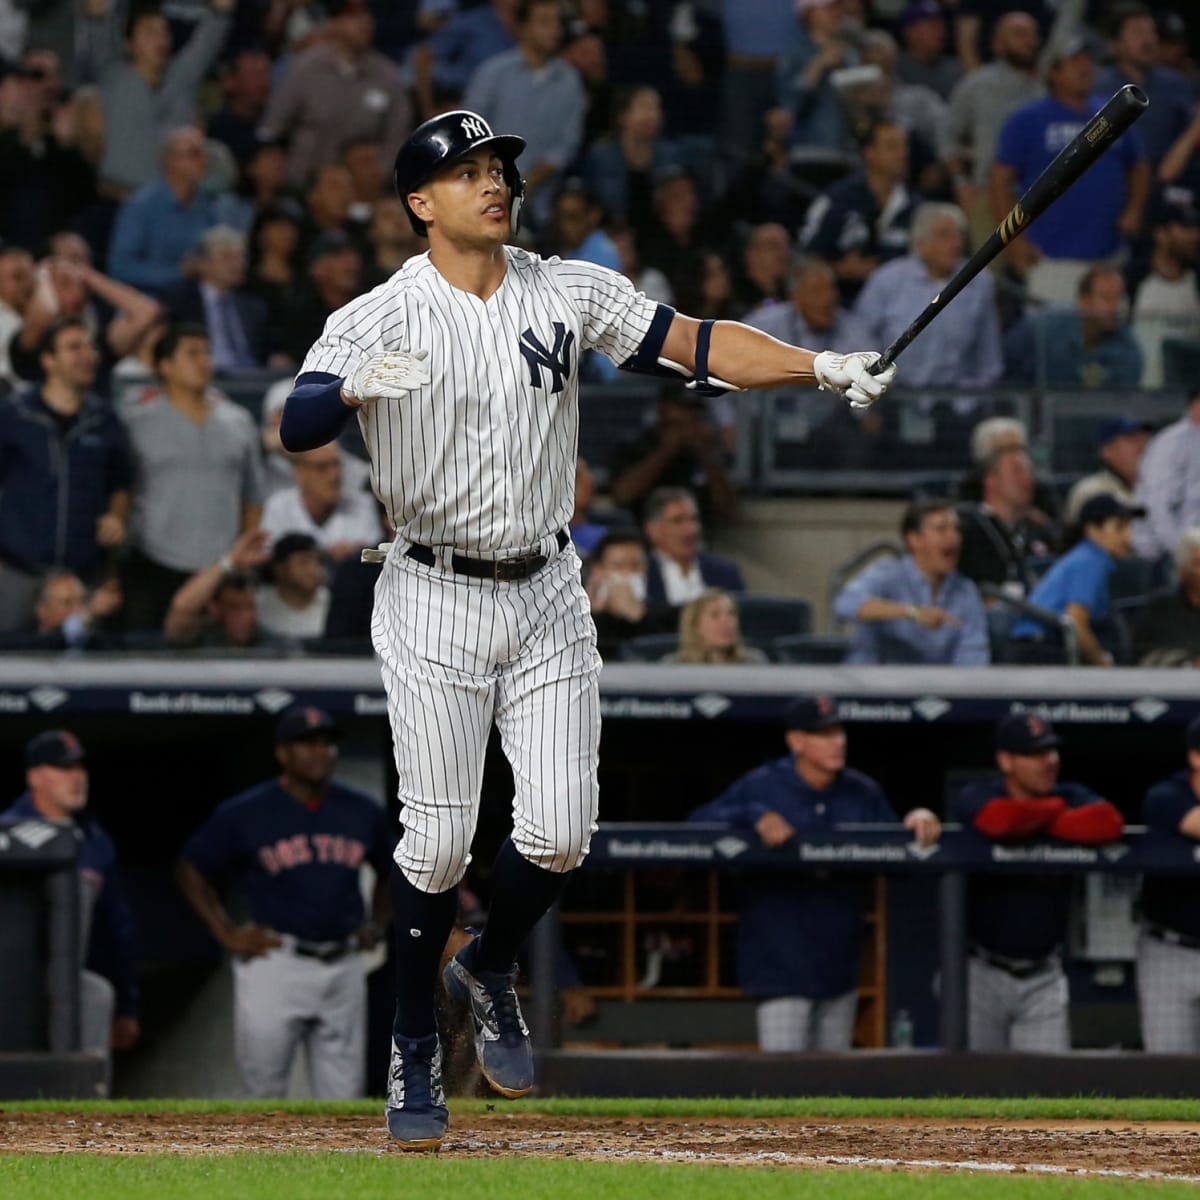 New York Yankees slugger Giancarlo Stanton is poised for a